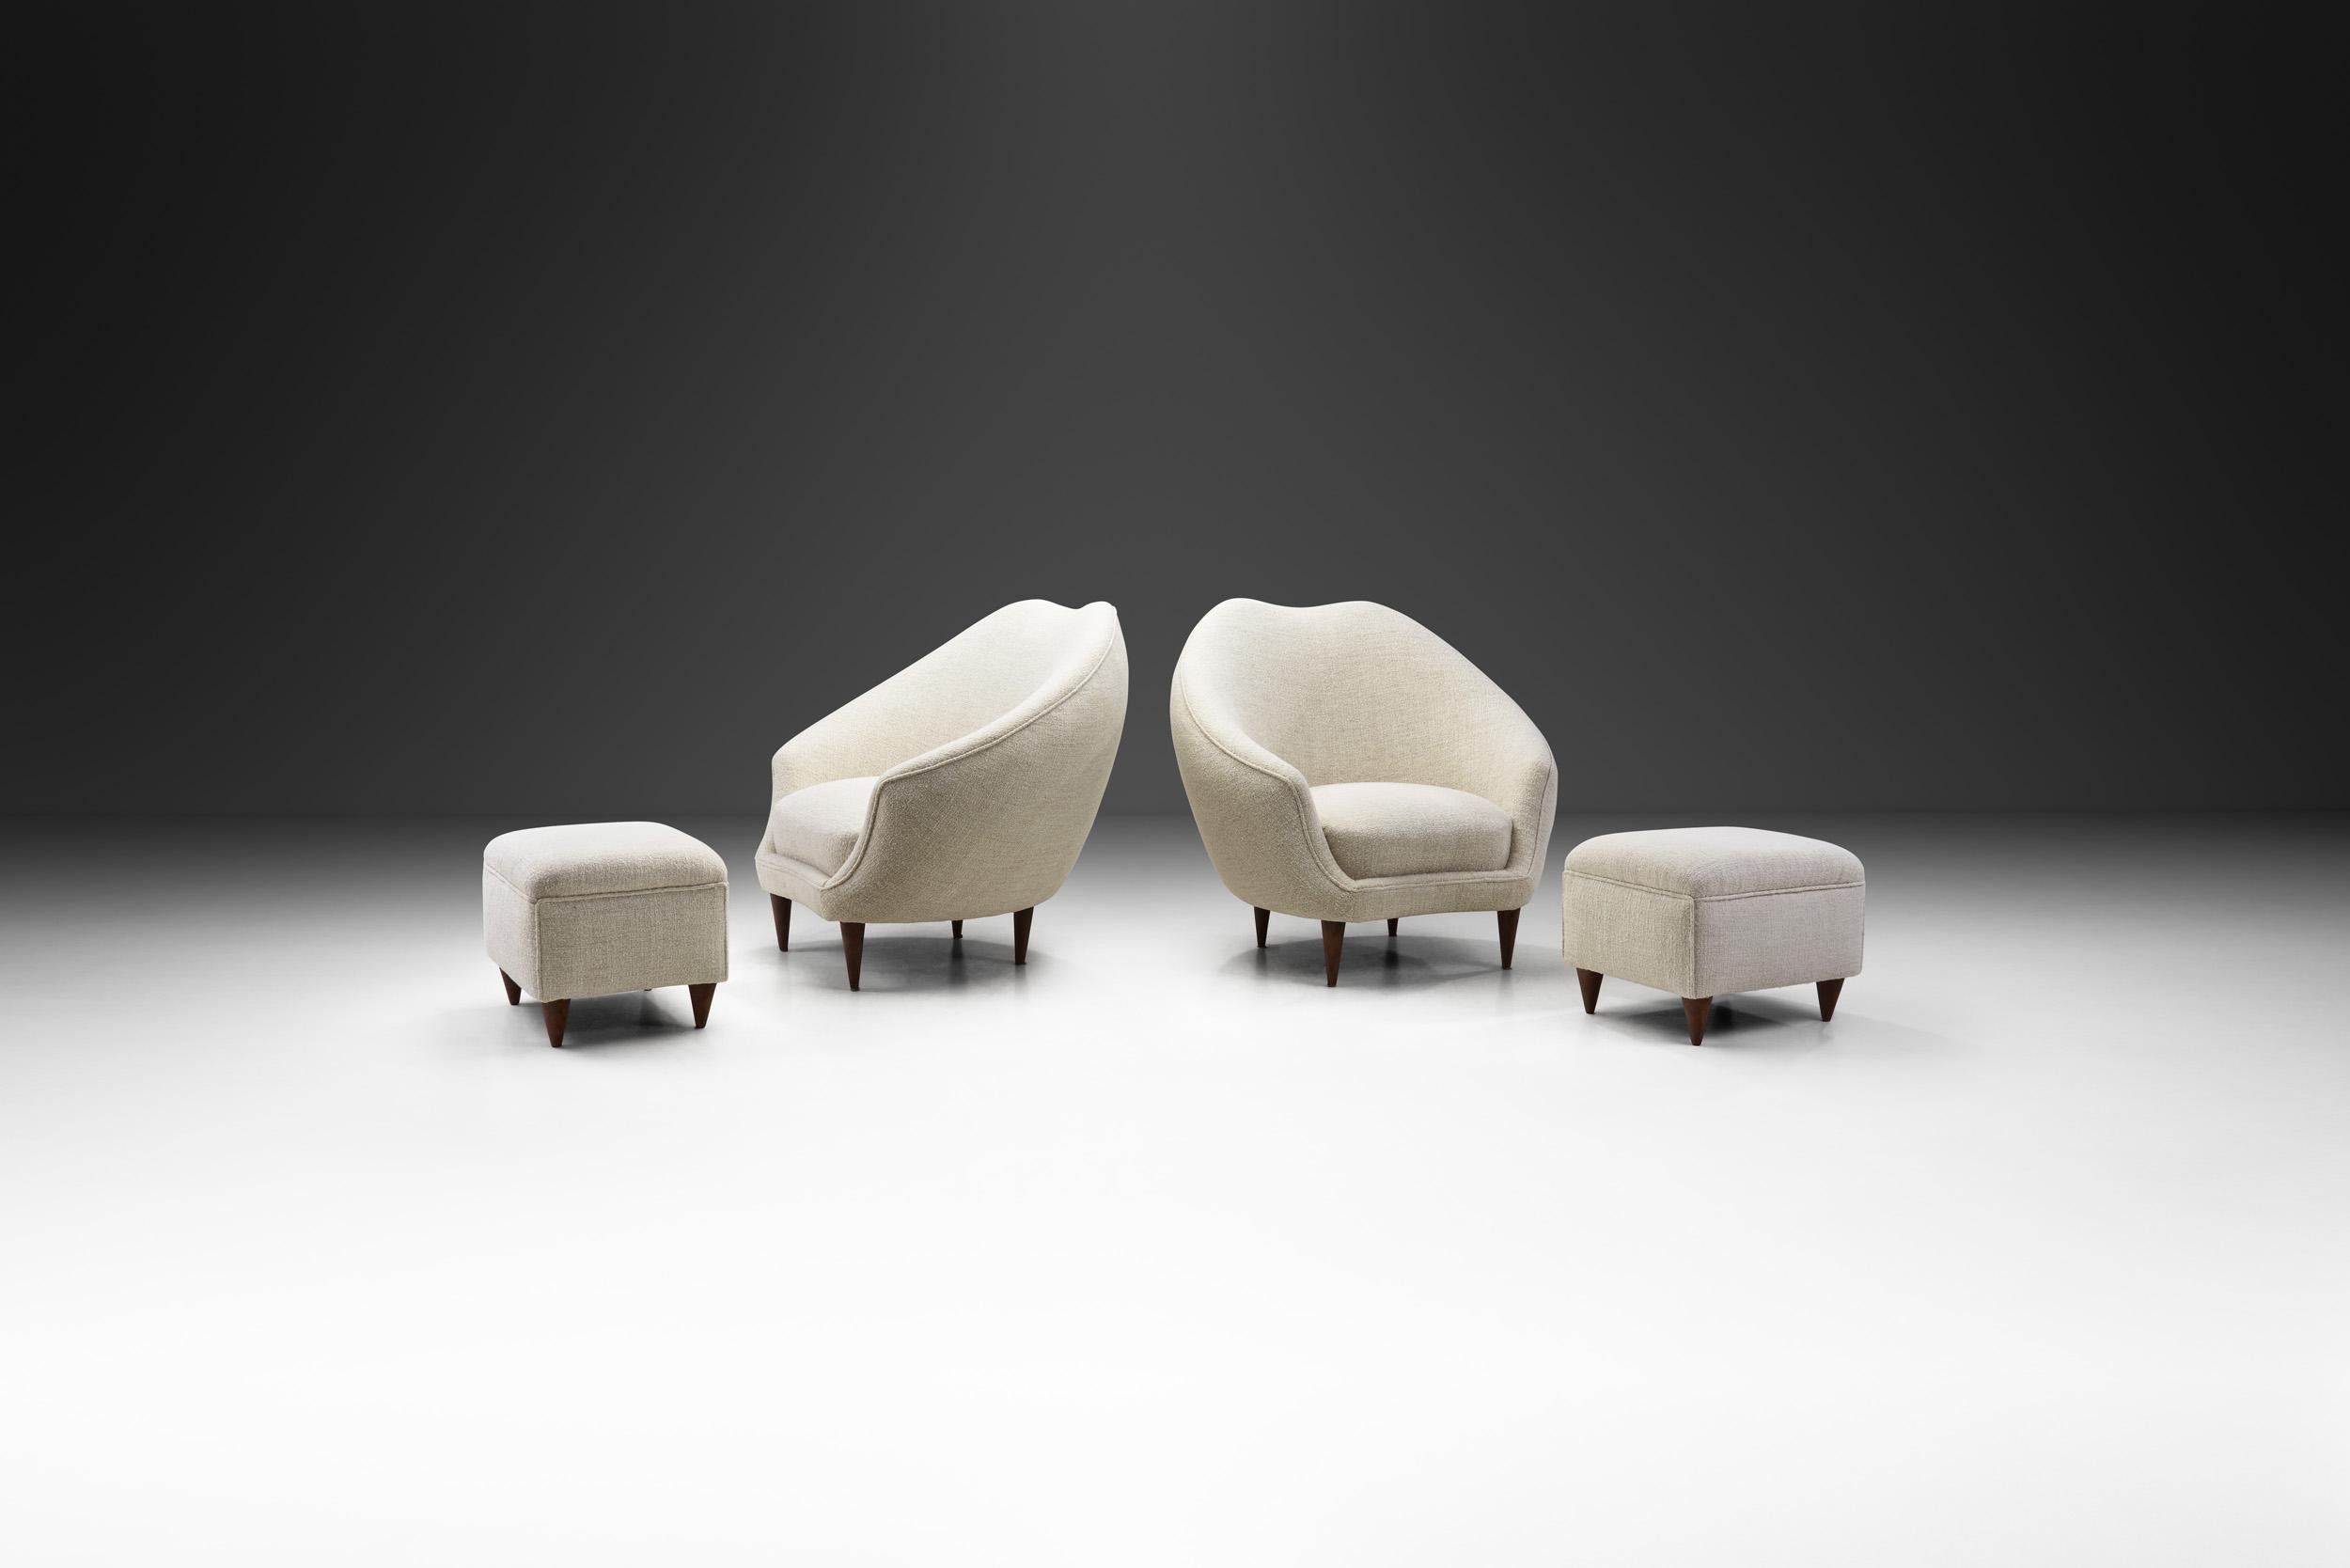 The Italian furniture and interior designer, Federico Munari is known as a master of elegantly organic forms. His seating models - including these chairs - were created to highlight the spirit of rebirth of post-war furniture design characterized by